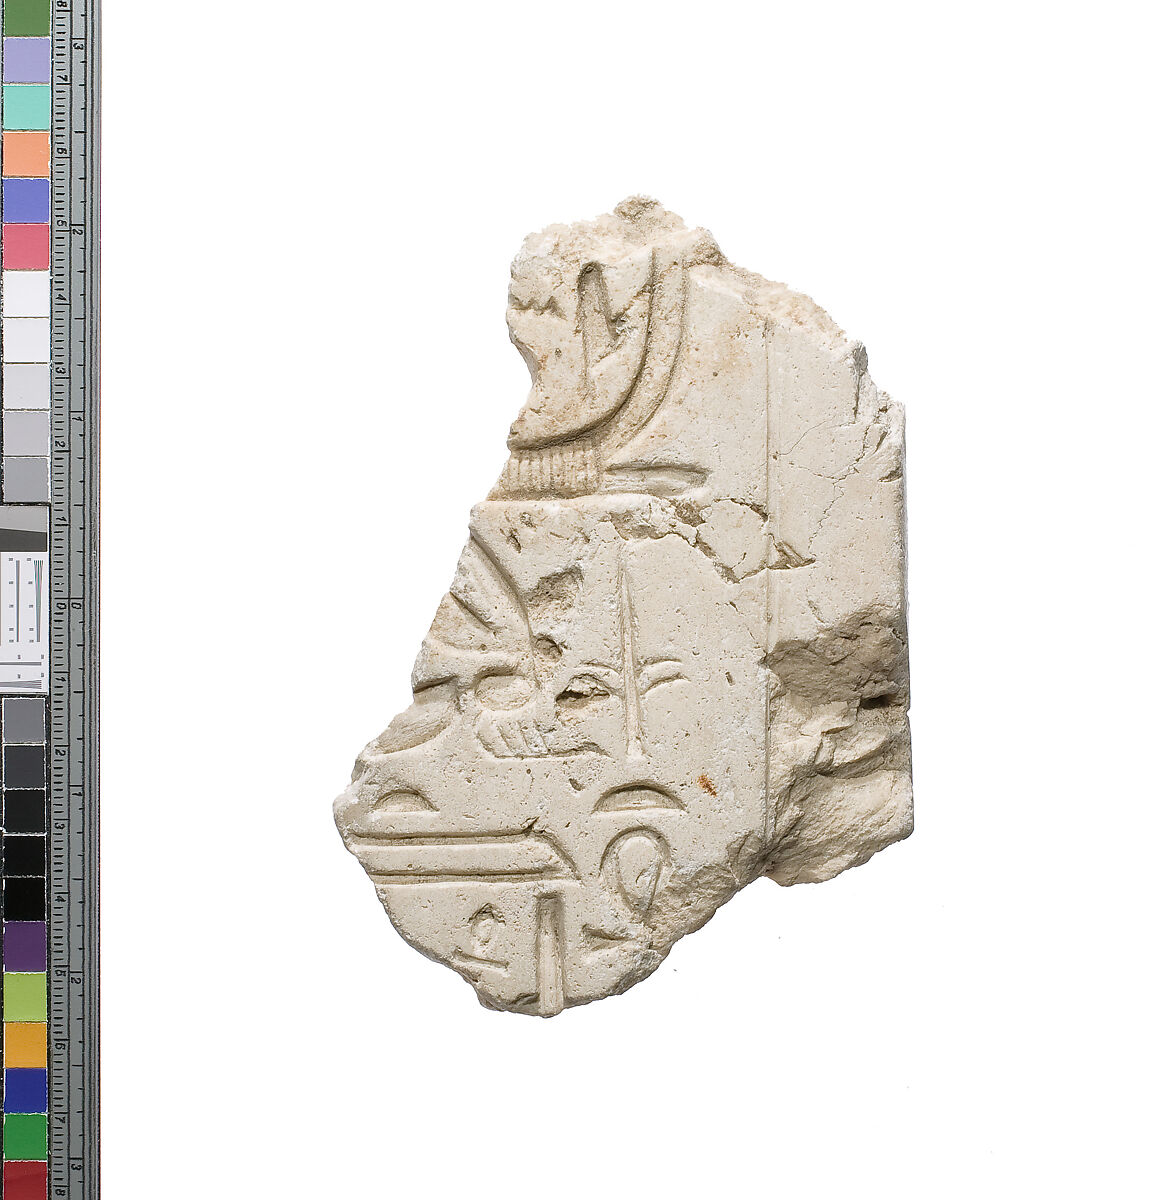 Inscribed fragment, Aten cartouche, Indurated limestone 